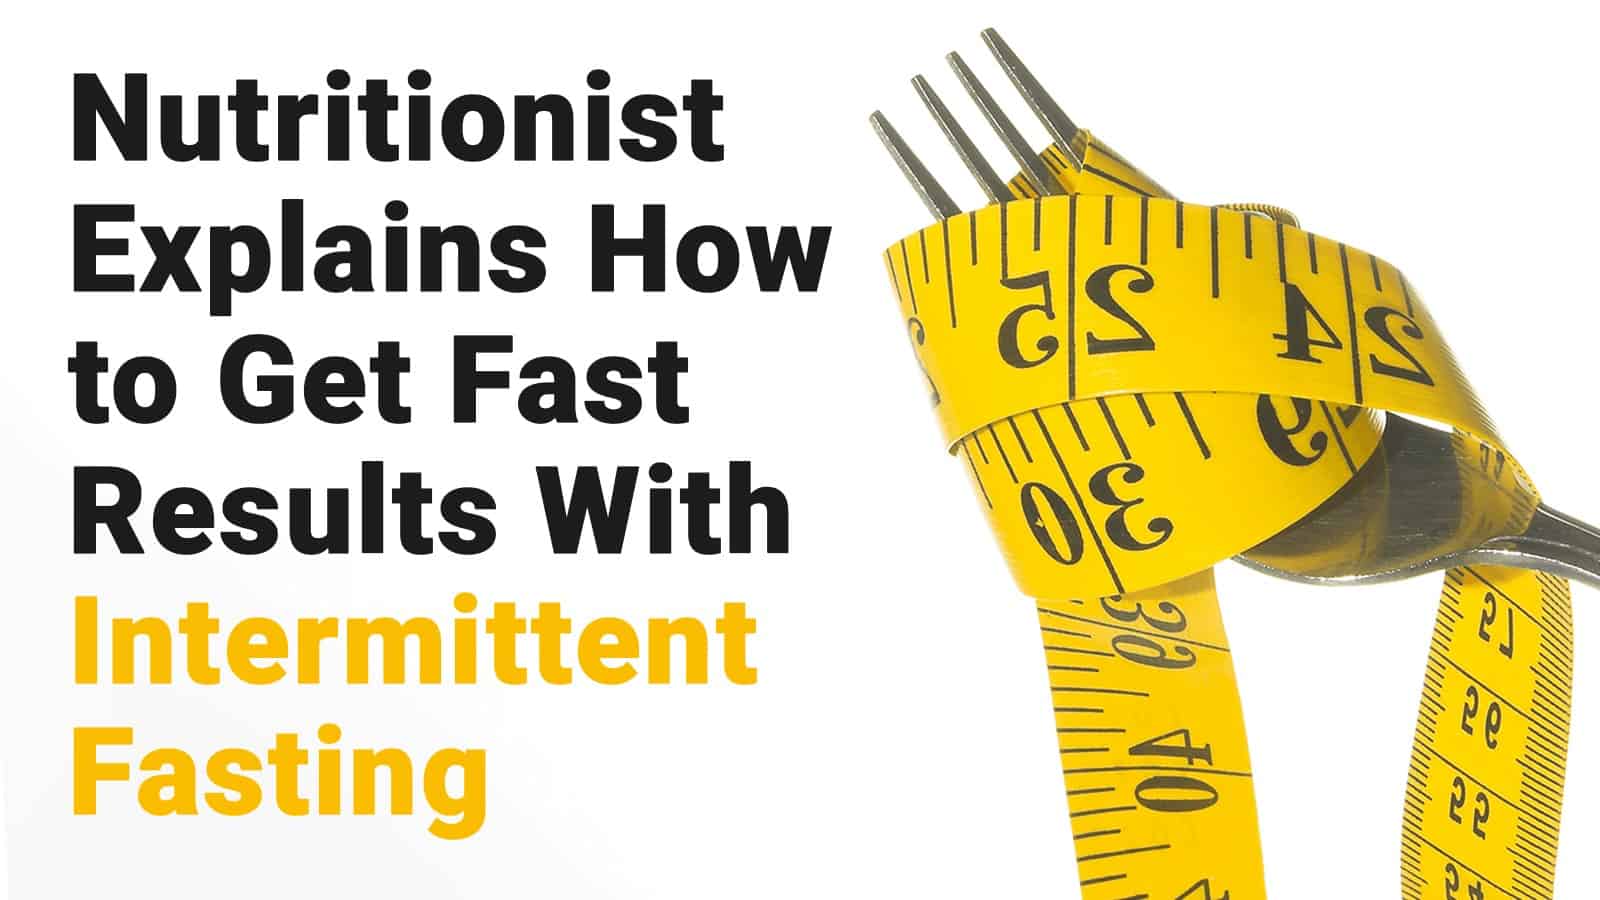 Nutritionist Explains How to Get Fast Results With Intermittent Fasting